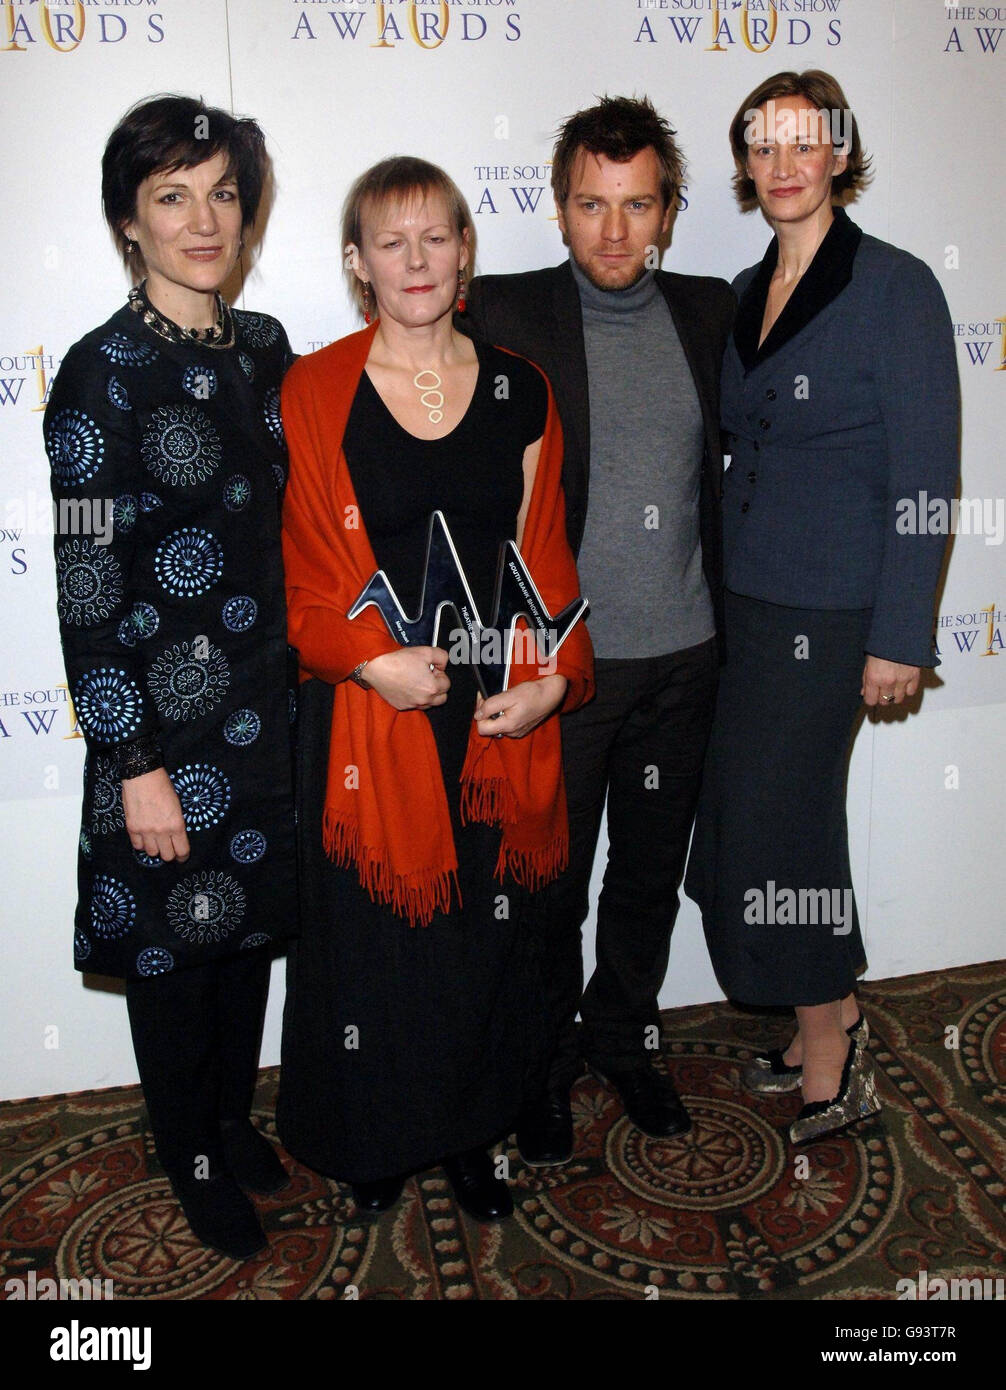 Winners of the Theatre Award (for 'Mary Stuart', L-R) Harriet Walter, Phyllida Lloyd and Janet McTeer with guest presenter Ewan McGregor at the 10th annual South Bank Show Awards, rewarding excellence in everything from opera to pop music and literature to visual art, at the Savoy, central London, Friday 27 January 2006. PRESS ASSOCIATION Photo. Photo credit should read: Steve Parsons/PA Stock Photo